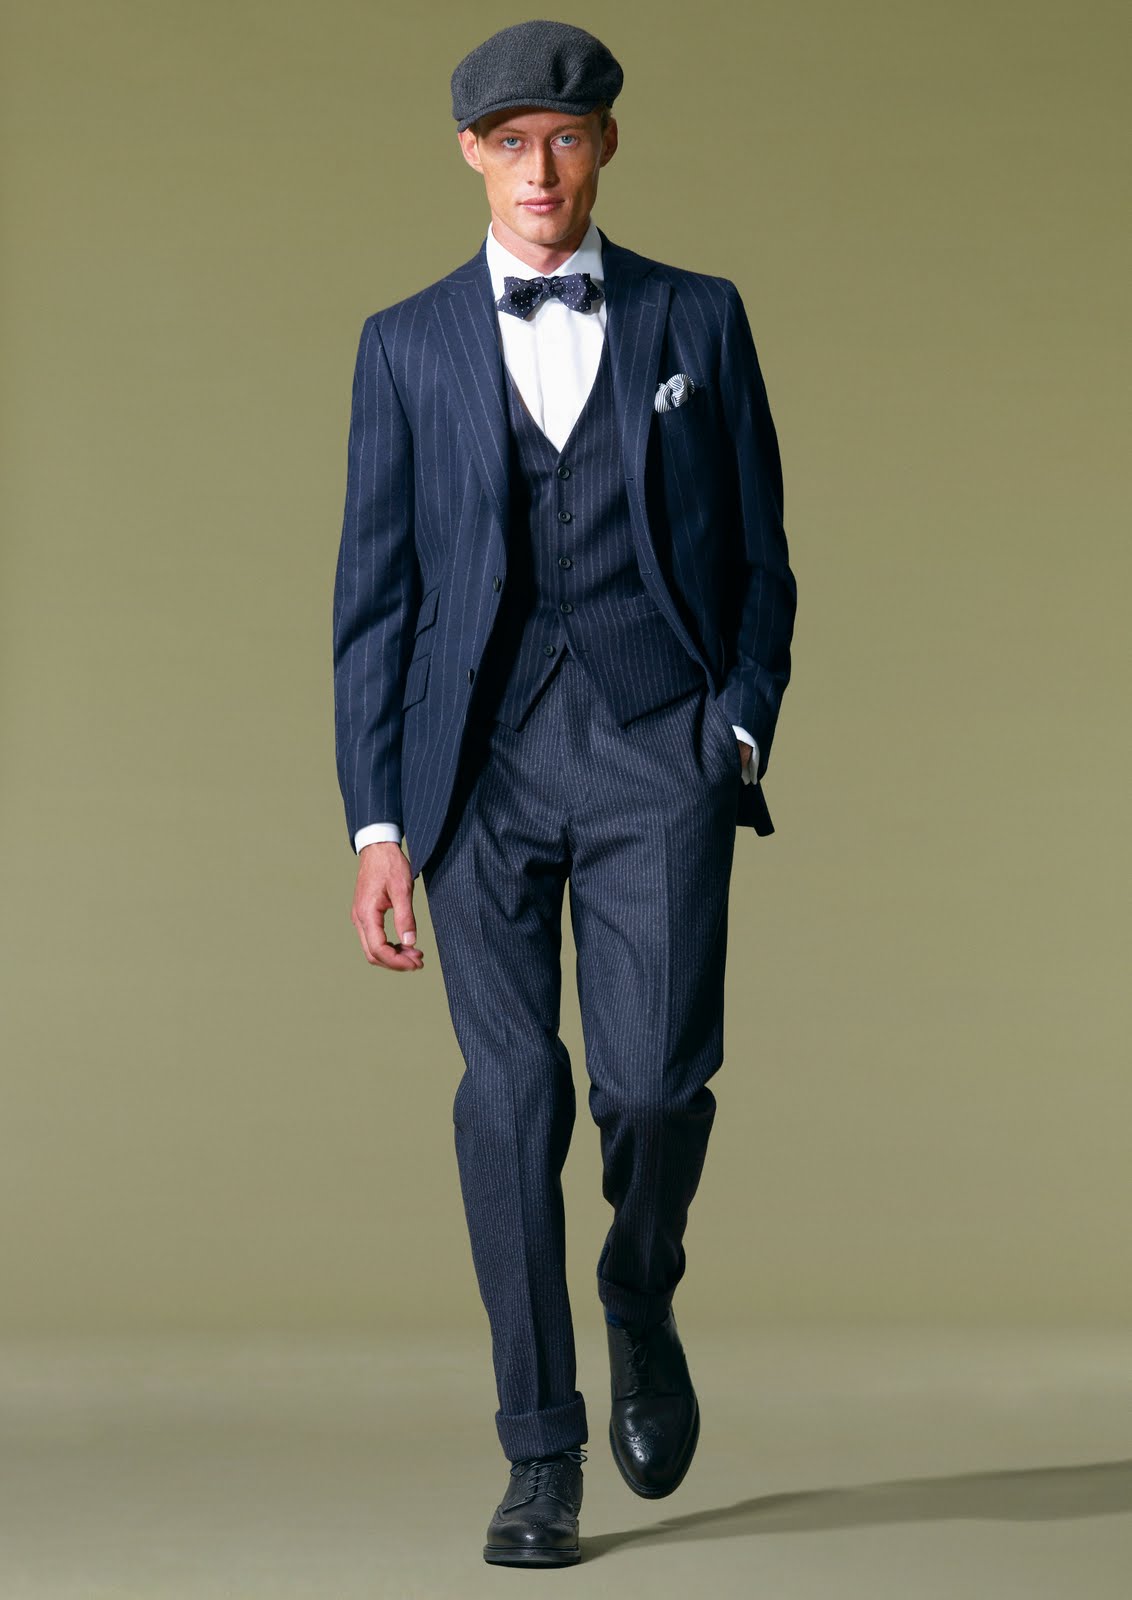 Wedding Suit Blog: The Best Suits For Short Men - 3 Tips to Looking ...